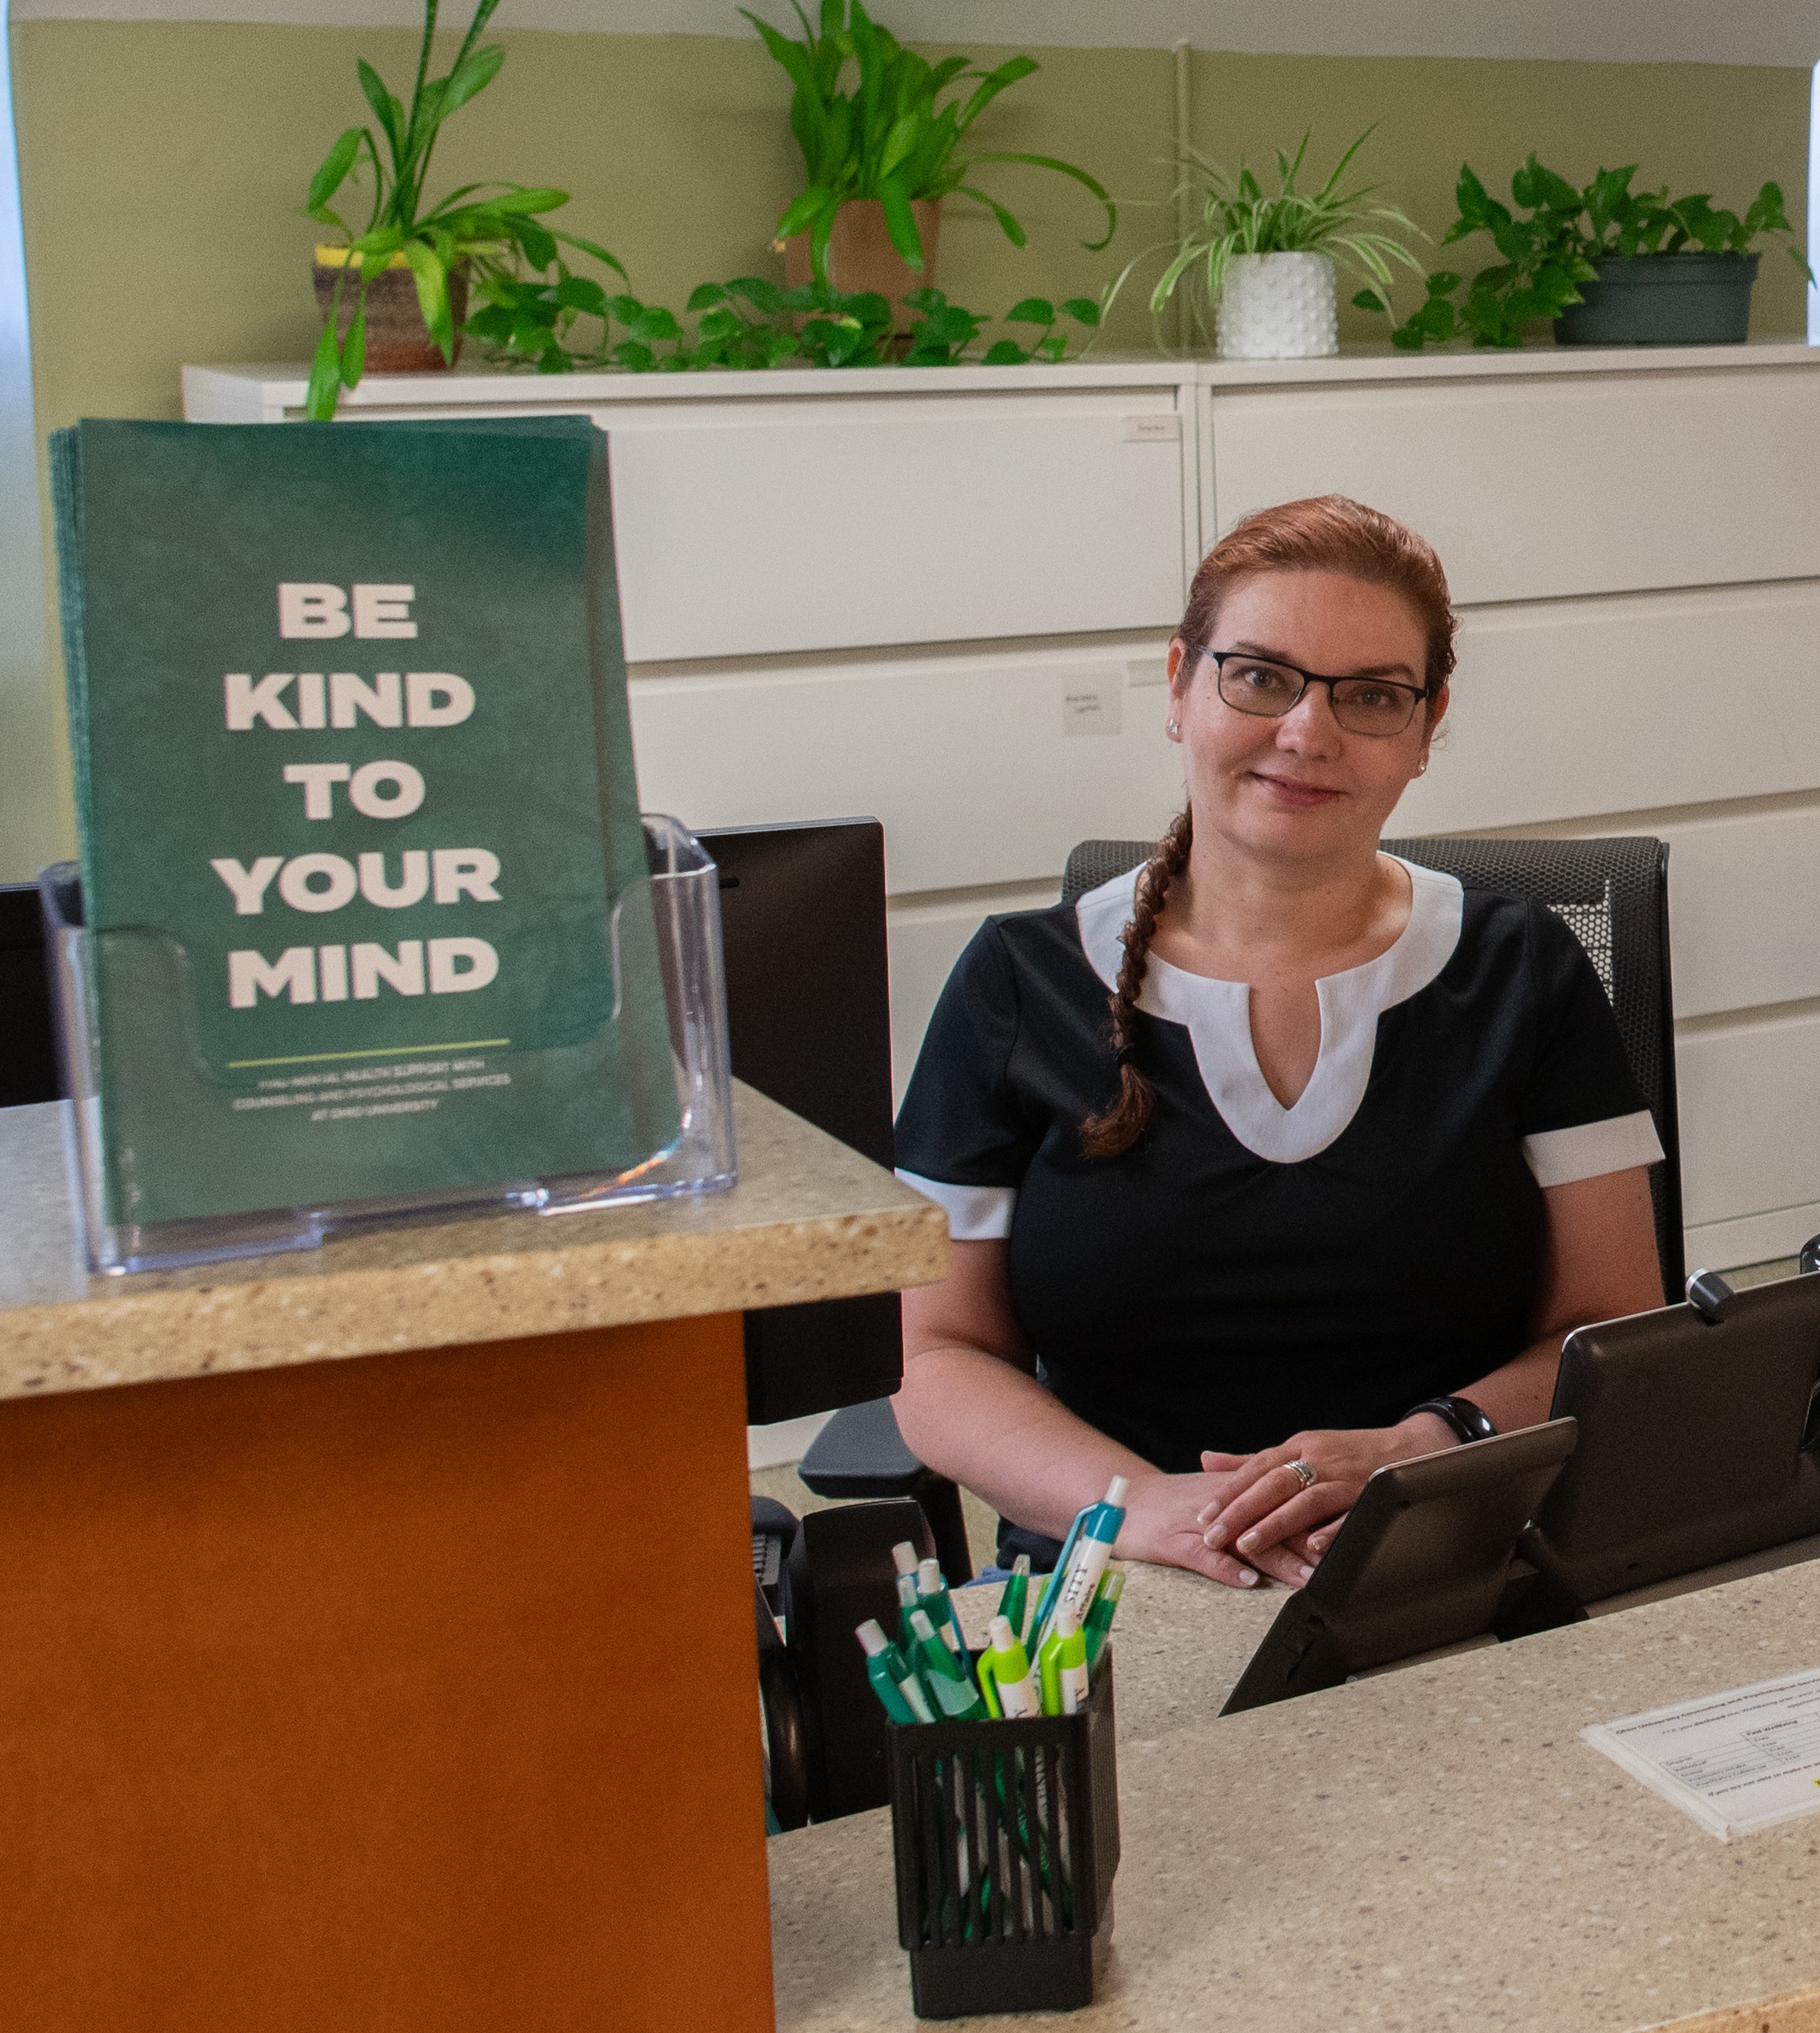 Receptionist at front desk with Be Kind To Your Mind brochure